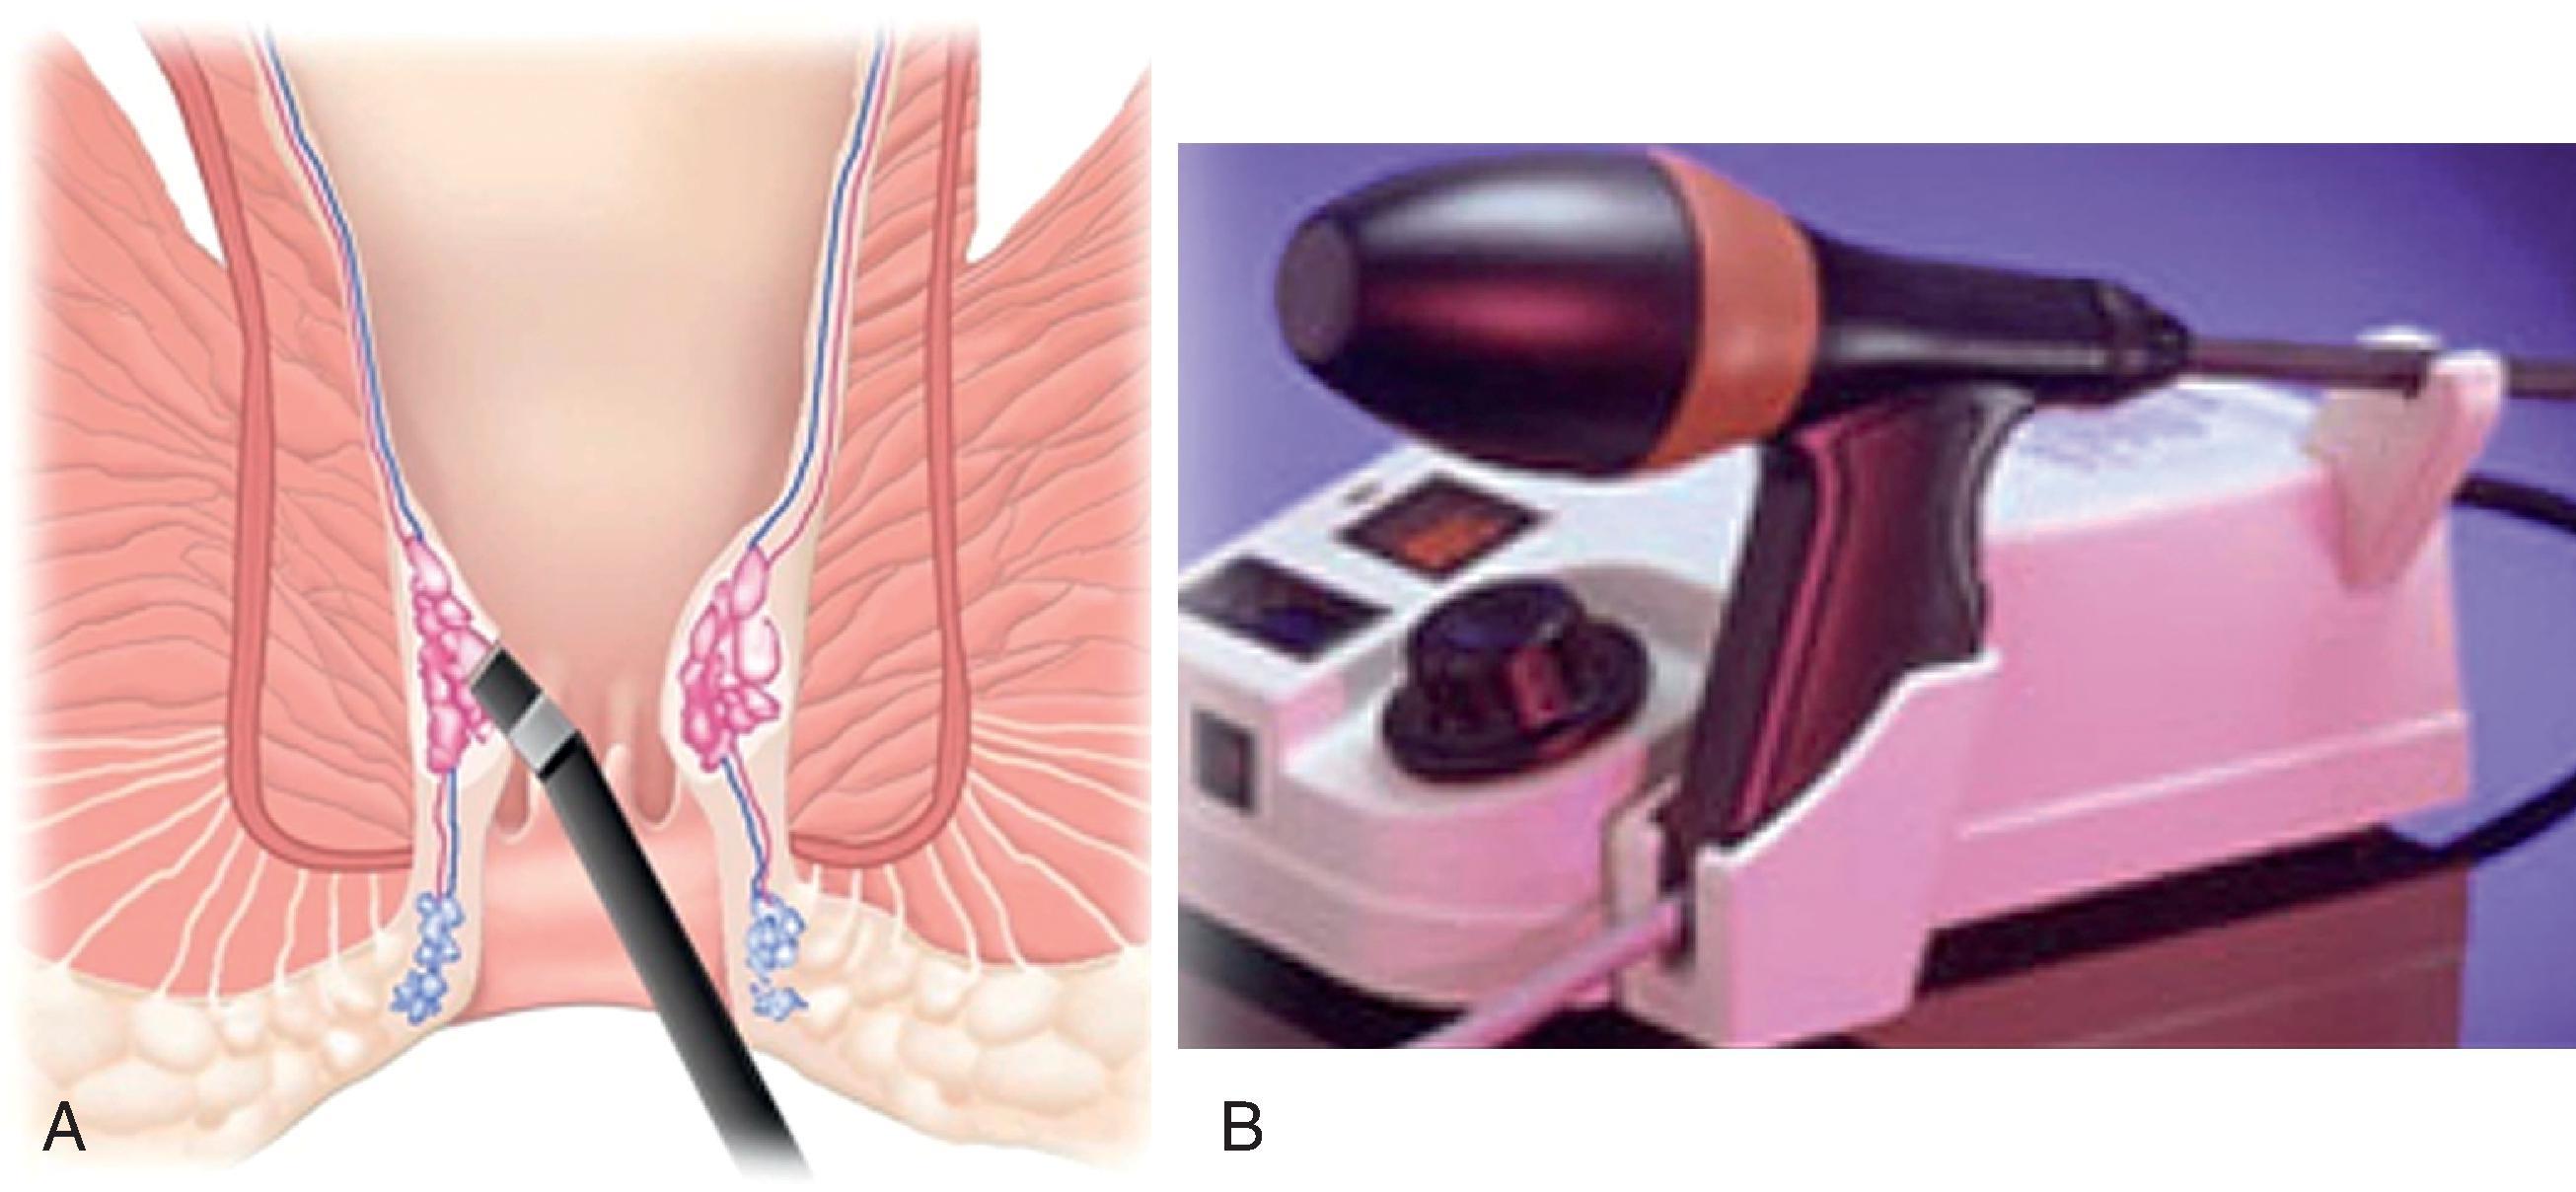 FIG. 5, Infrared coagulation of internal hemorrhoids. (A) The applicator is applied to the apex of the hemorrhoid. (B) The IRC 2100 device (Redfield Corporation).